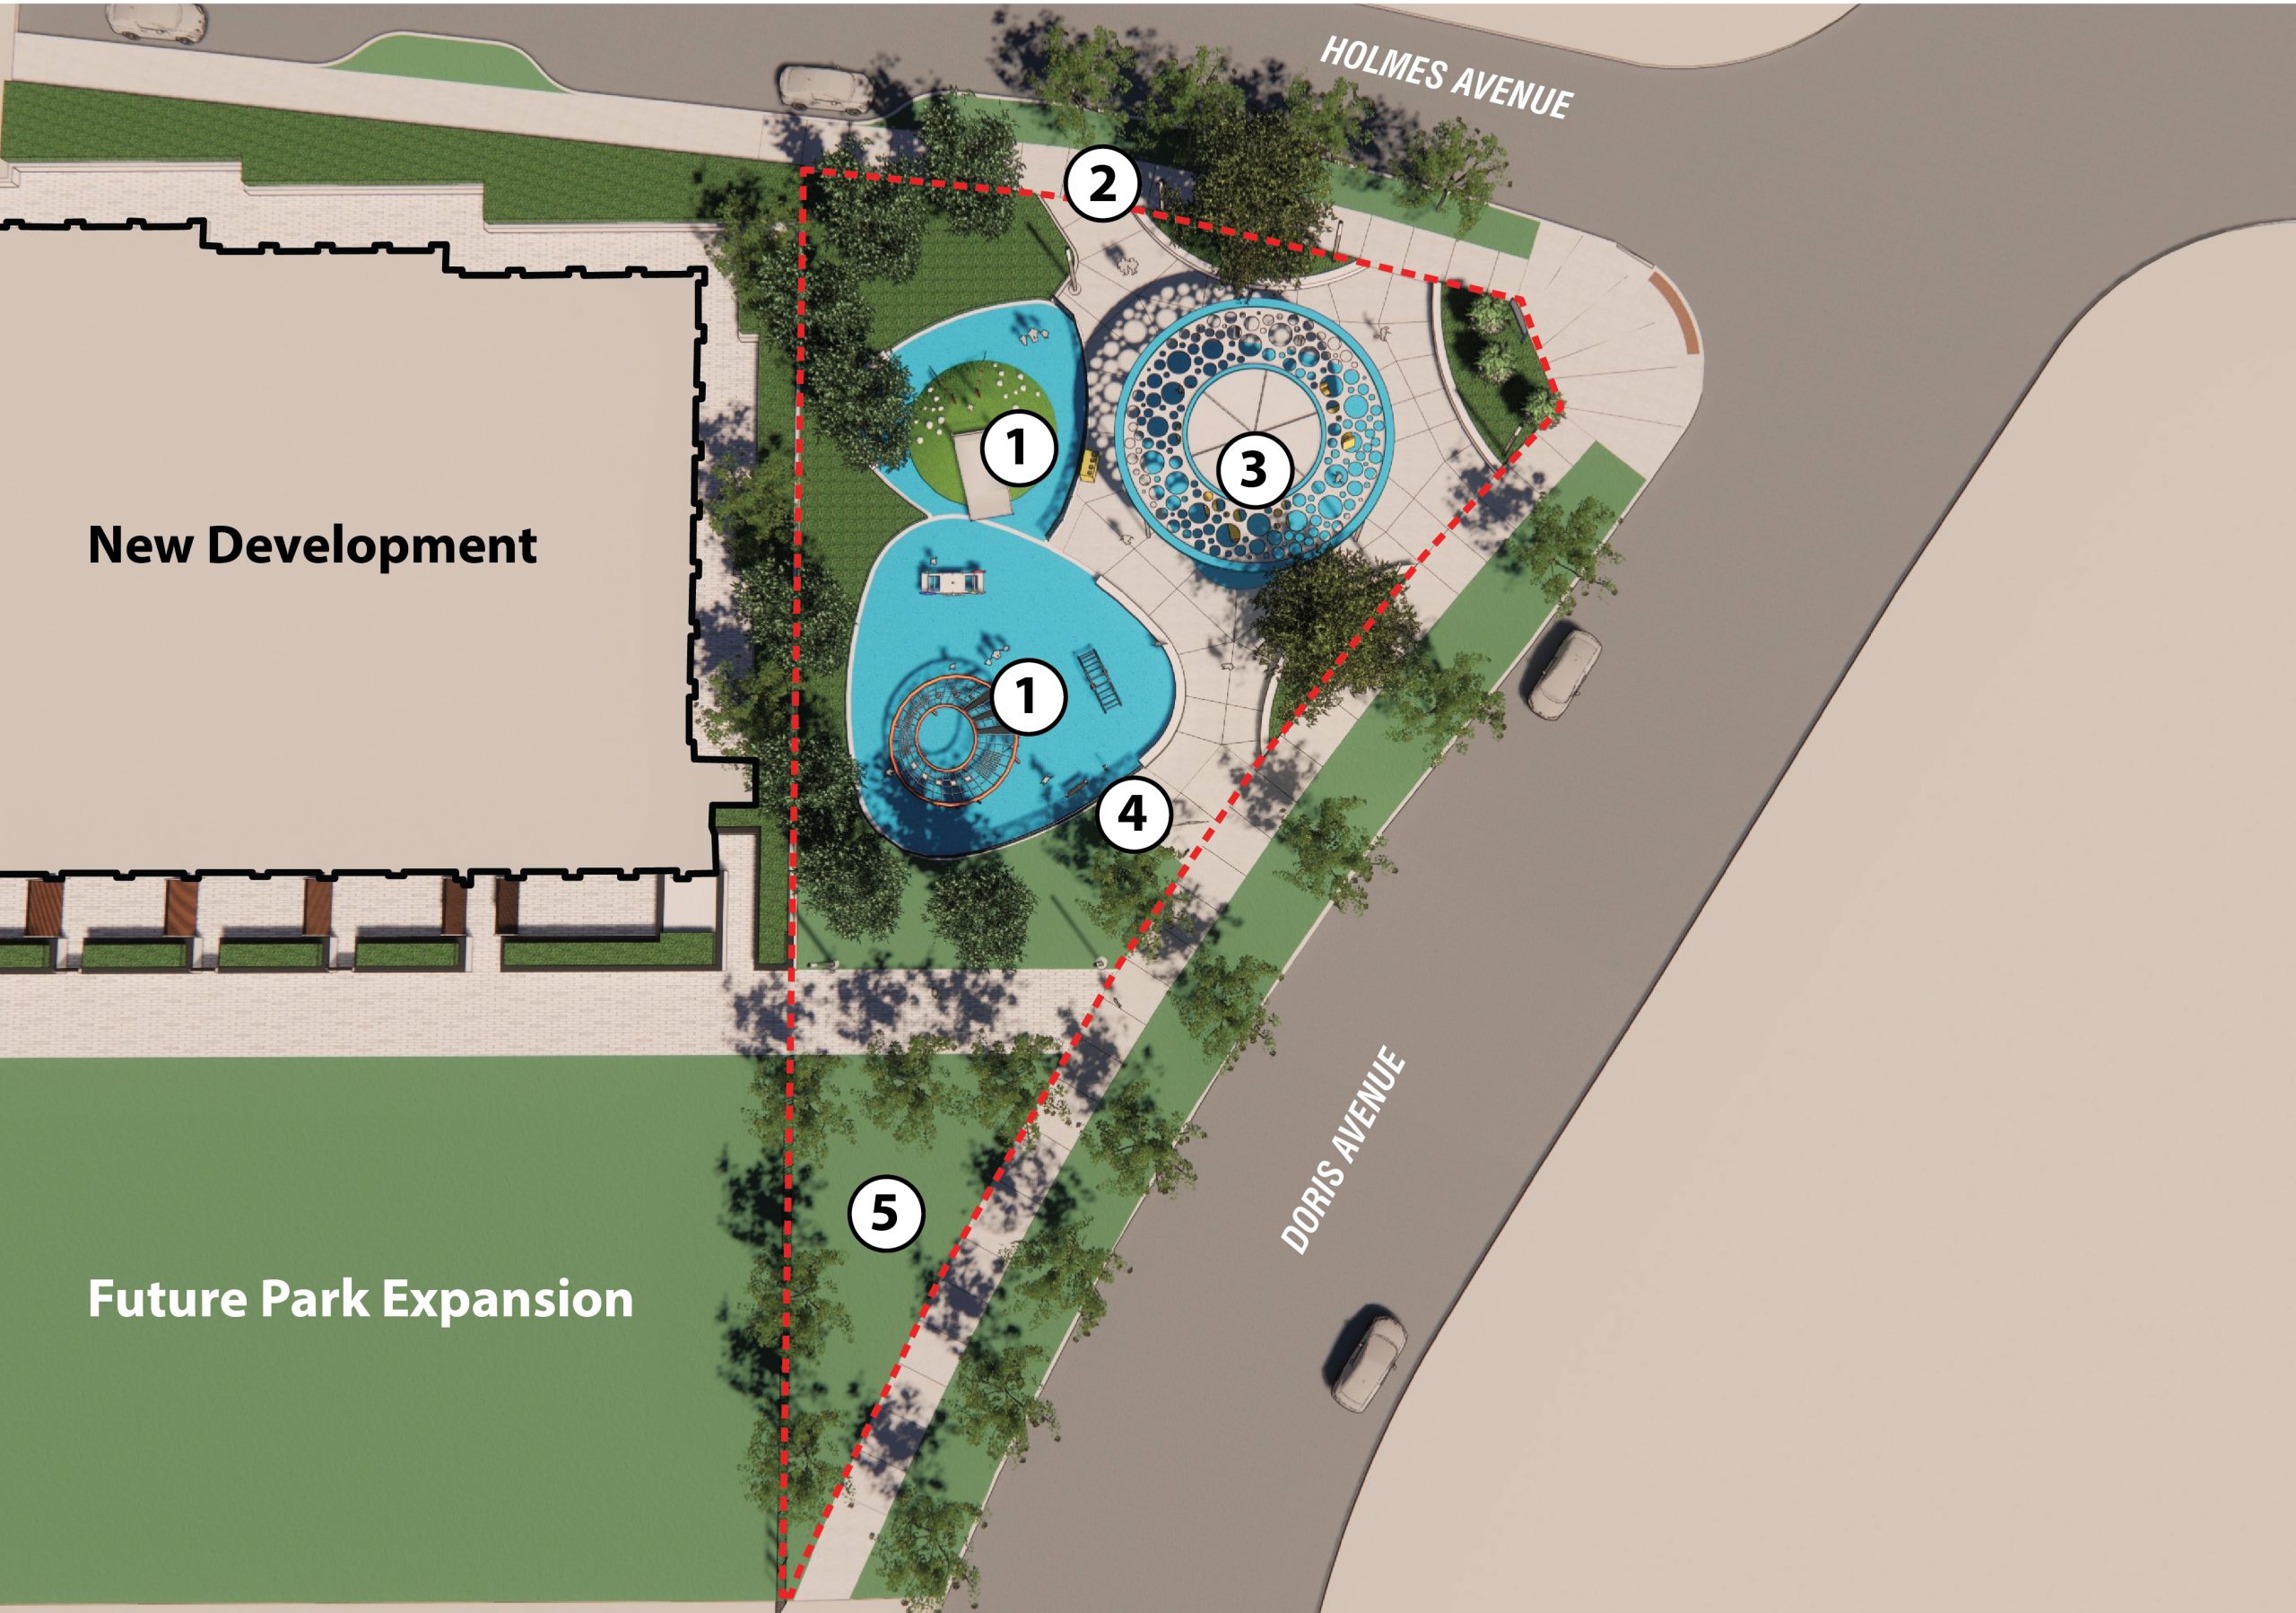 An aerial plan of the park design for 25 Holmes Avenue, with numbered labels indicating the location of each feature. From the north to south, the park features a water fountain along Holmes Avenue, a play area, shade structure with seating, bike racks and an open law to the south, near Doris Avenue. 